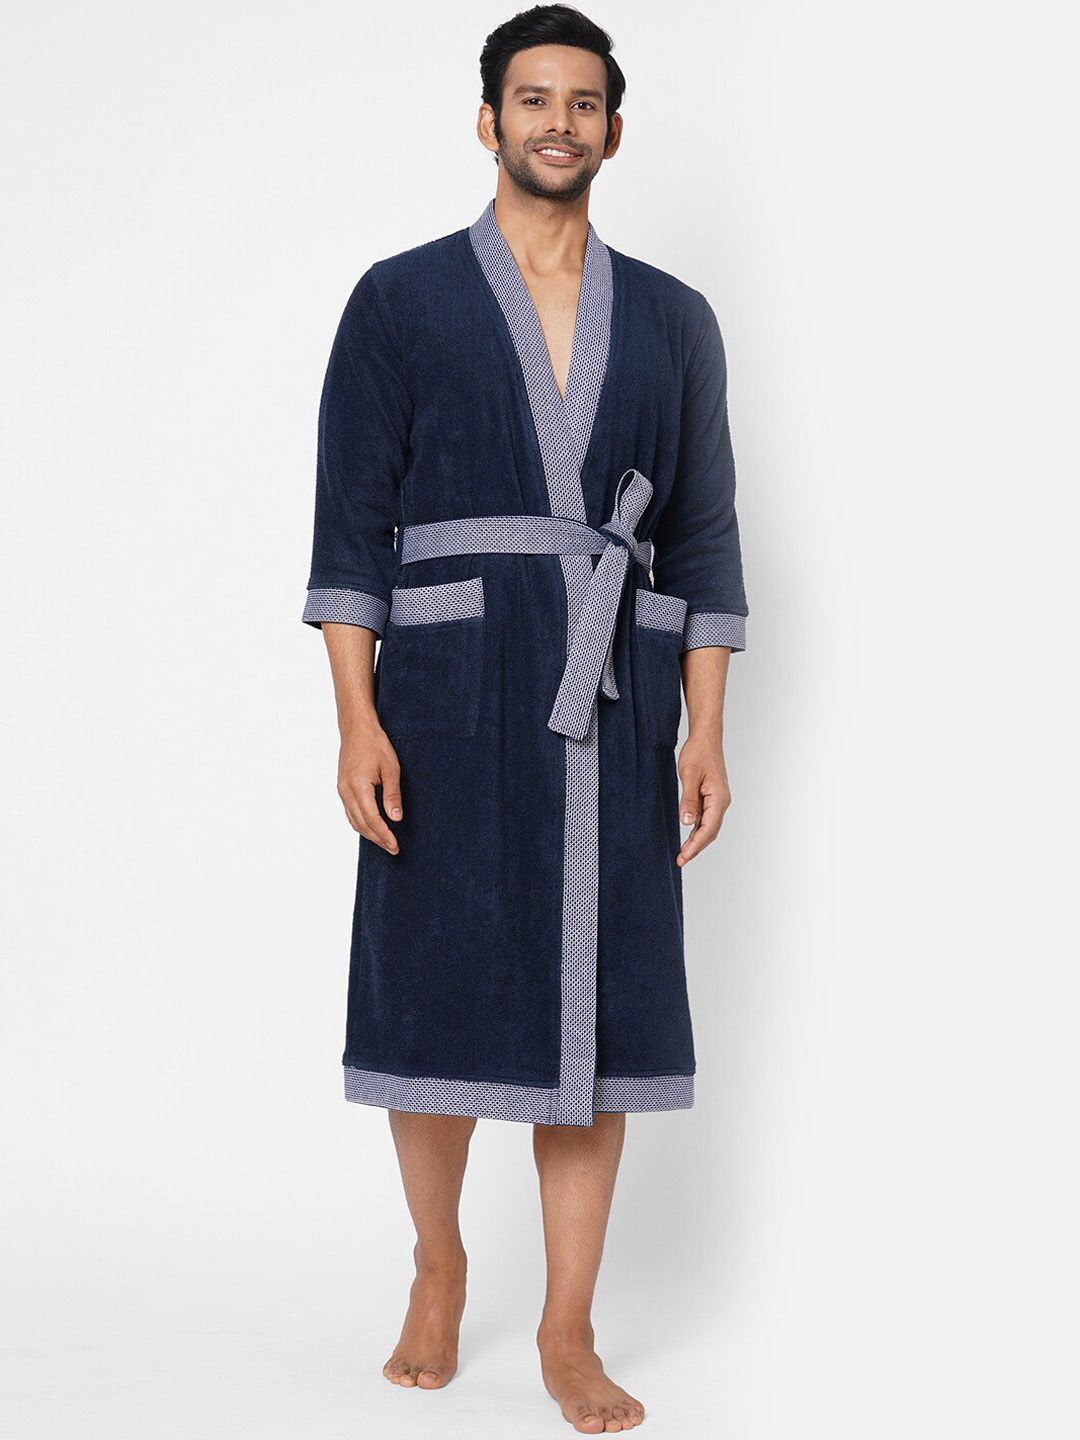 SPACES Blue & Grey Solid 380 GSM Pure Cotton Bath Robe Price in India